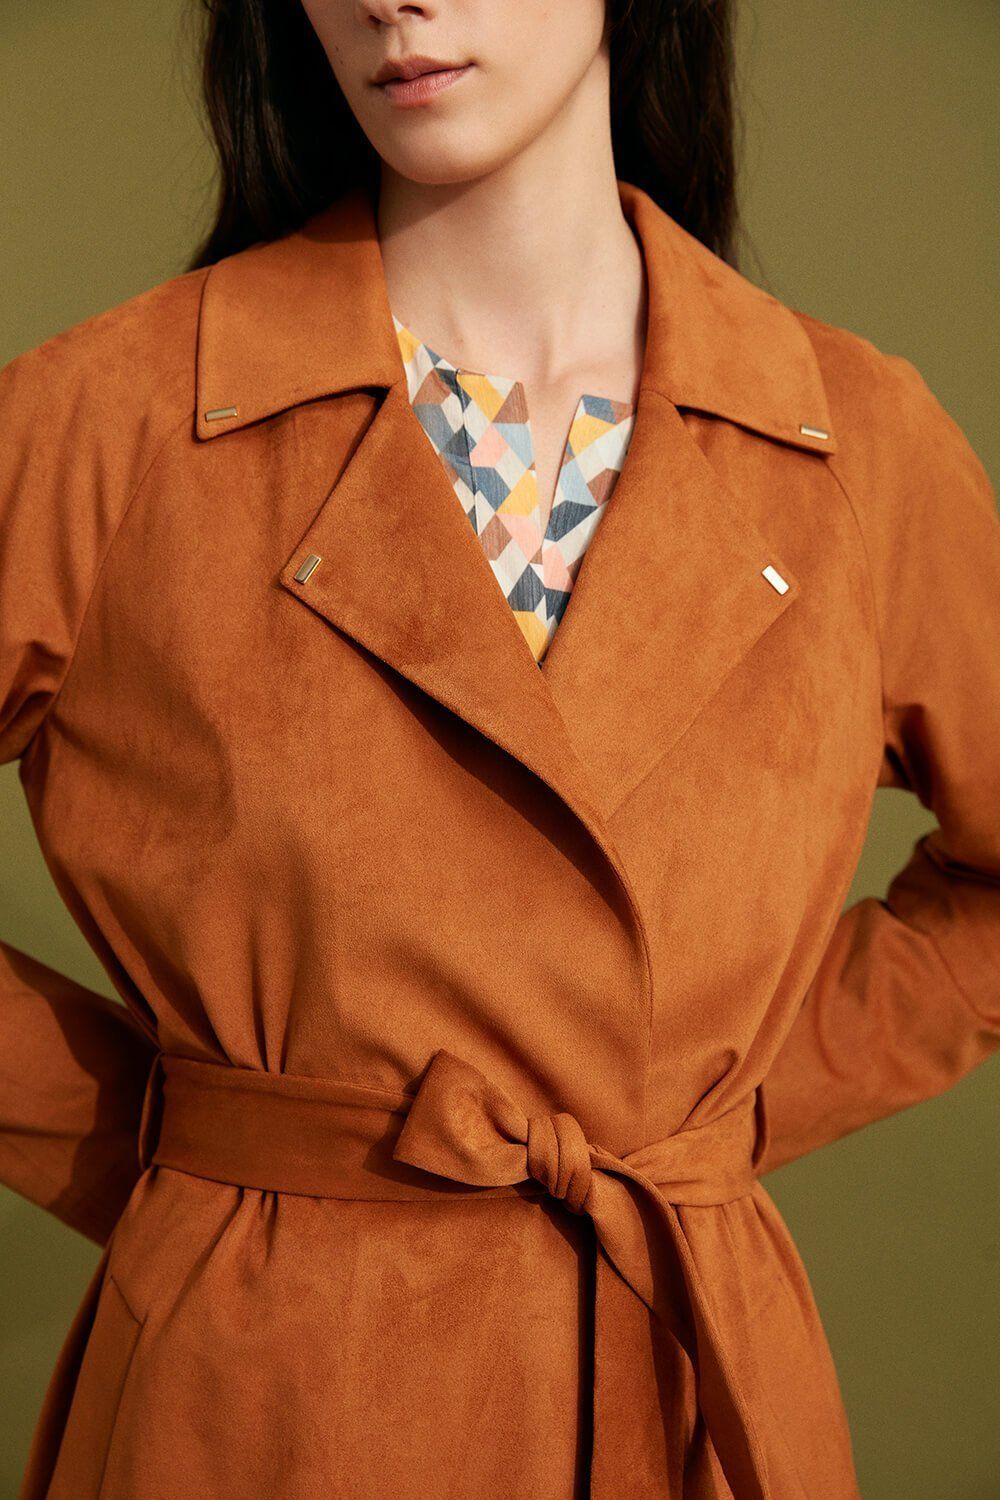 Through its flowy fabric and soft texture, this take on the classic trench coat is perfect for seasonal transitions. This terracotta, trench style coat is defined by a clean-cut silhouette, narrow shoulders, and a wrap close belt. The refined silhouette can be worn belted for a fitted look combined with your favourite dress and heels or simply with sneakers and jeans for a more casual daytime look.

Mid-calf length
Long sleeves
Wrap close belt
Terracotta colour
Model is 5'10